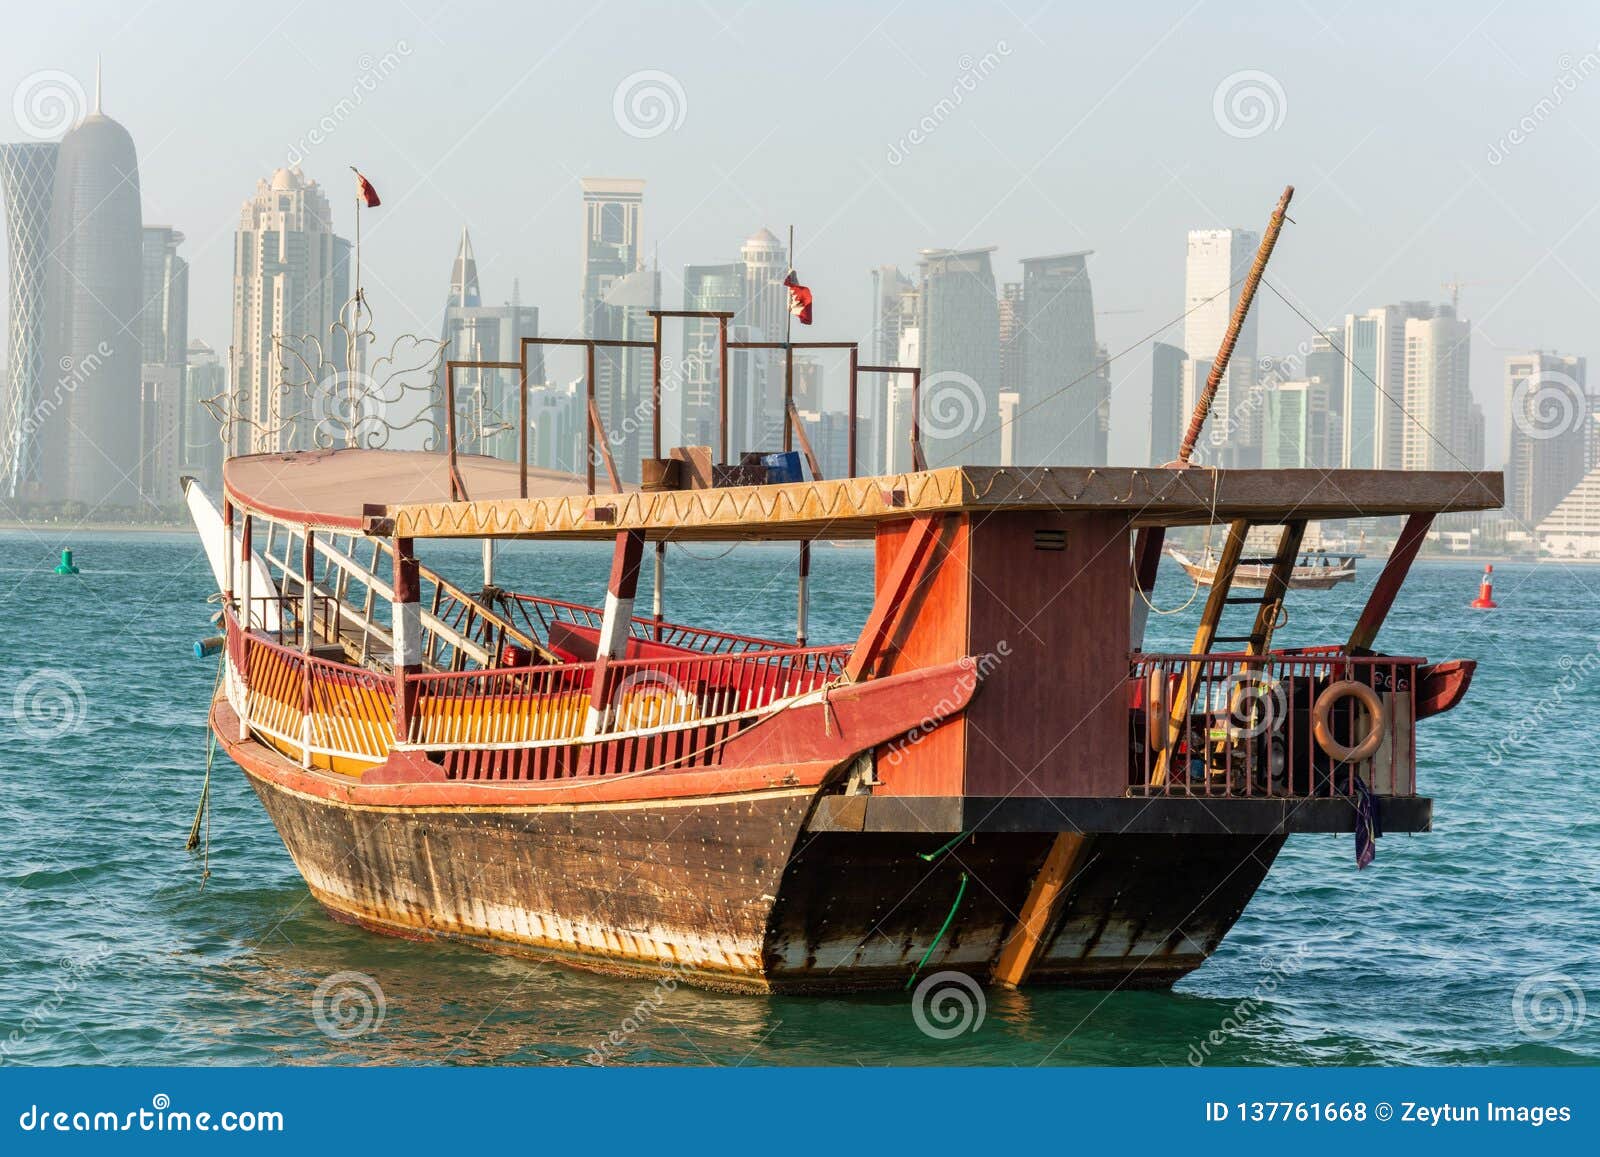 traditional dhow boat in qatar